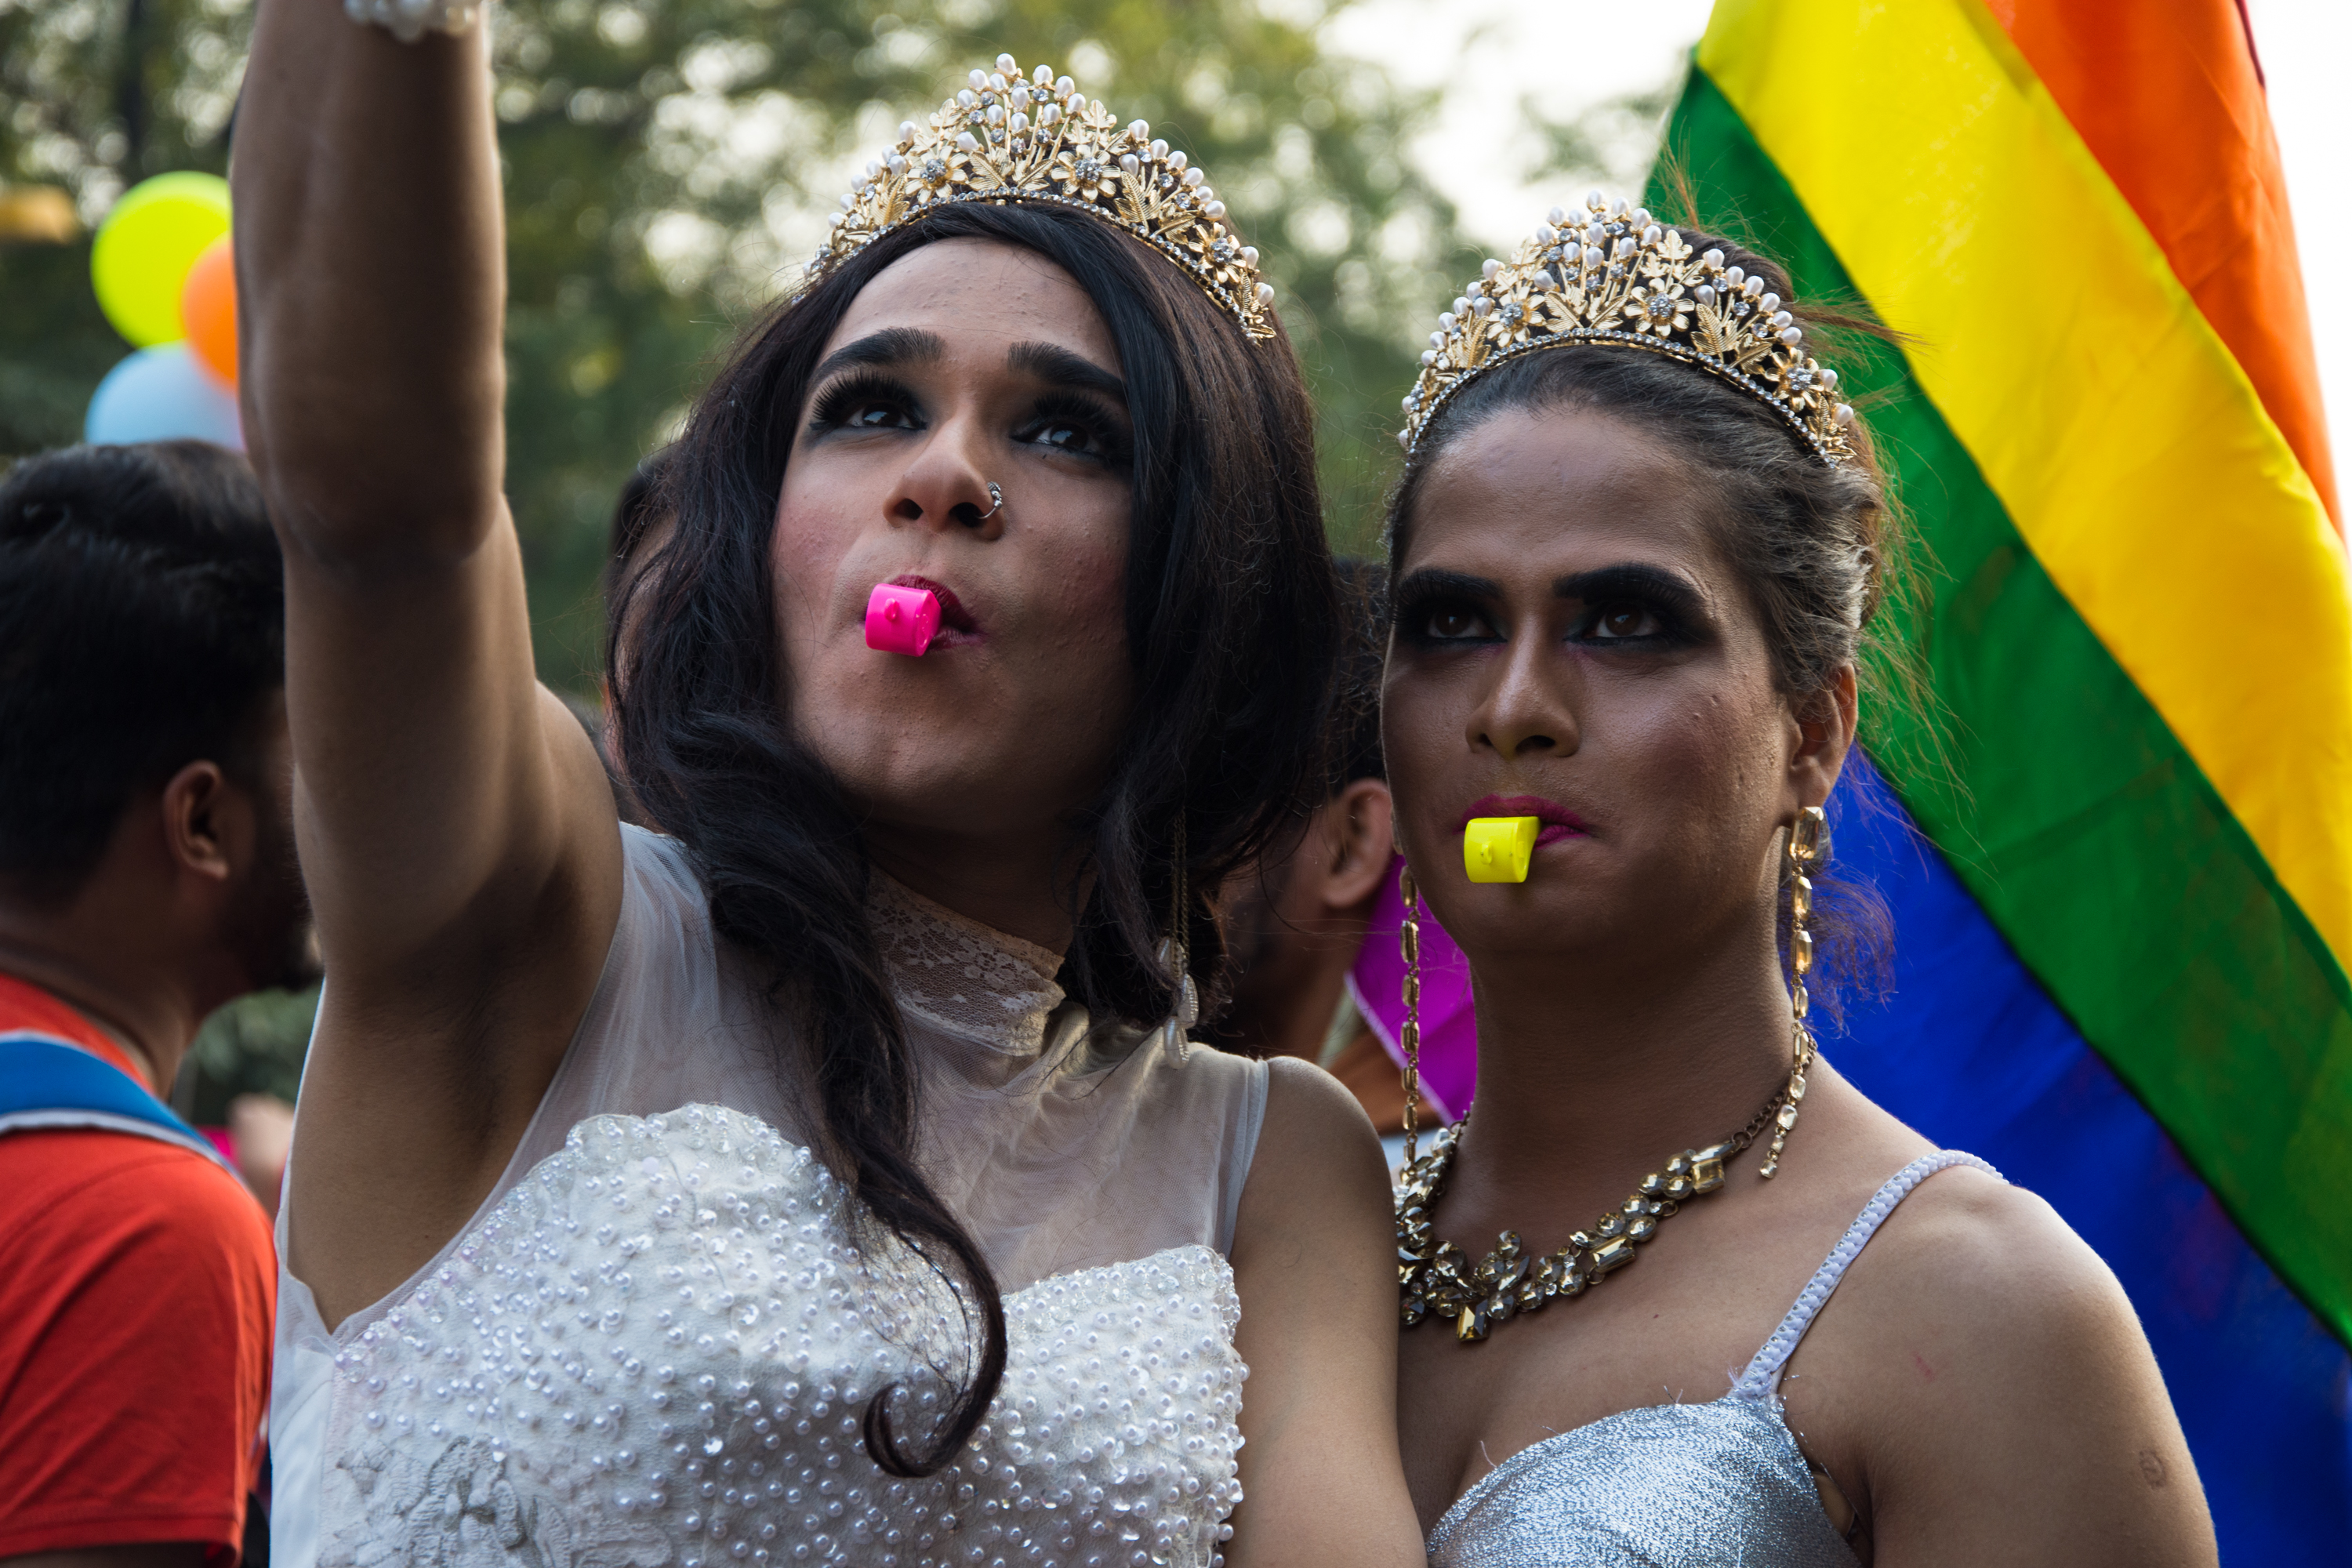 Until last year, the LGBTQ communities and their supporters gathered at the Pride to demand equal rights from the government and to criticise IPC Section 377. On Sunday, everyone gathered to celebrate.